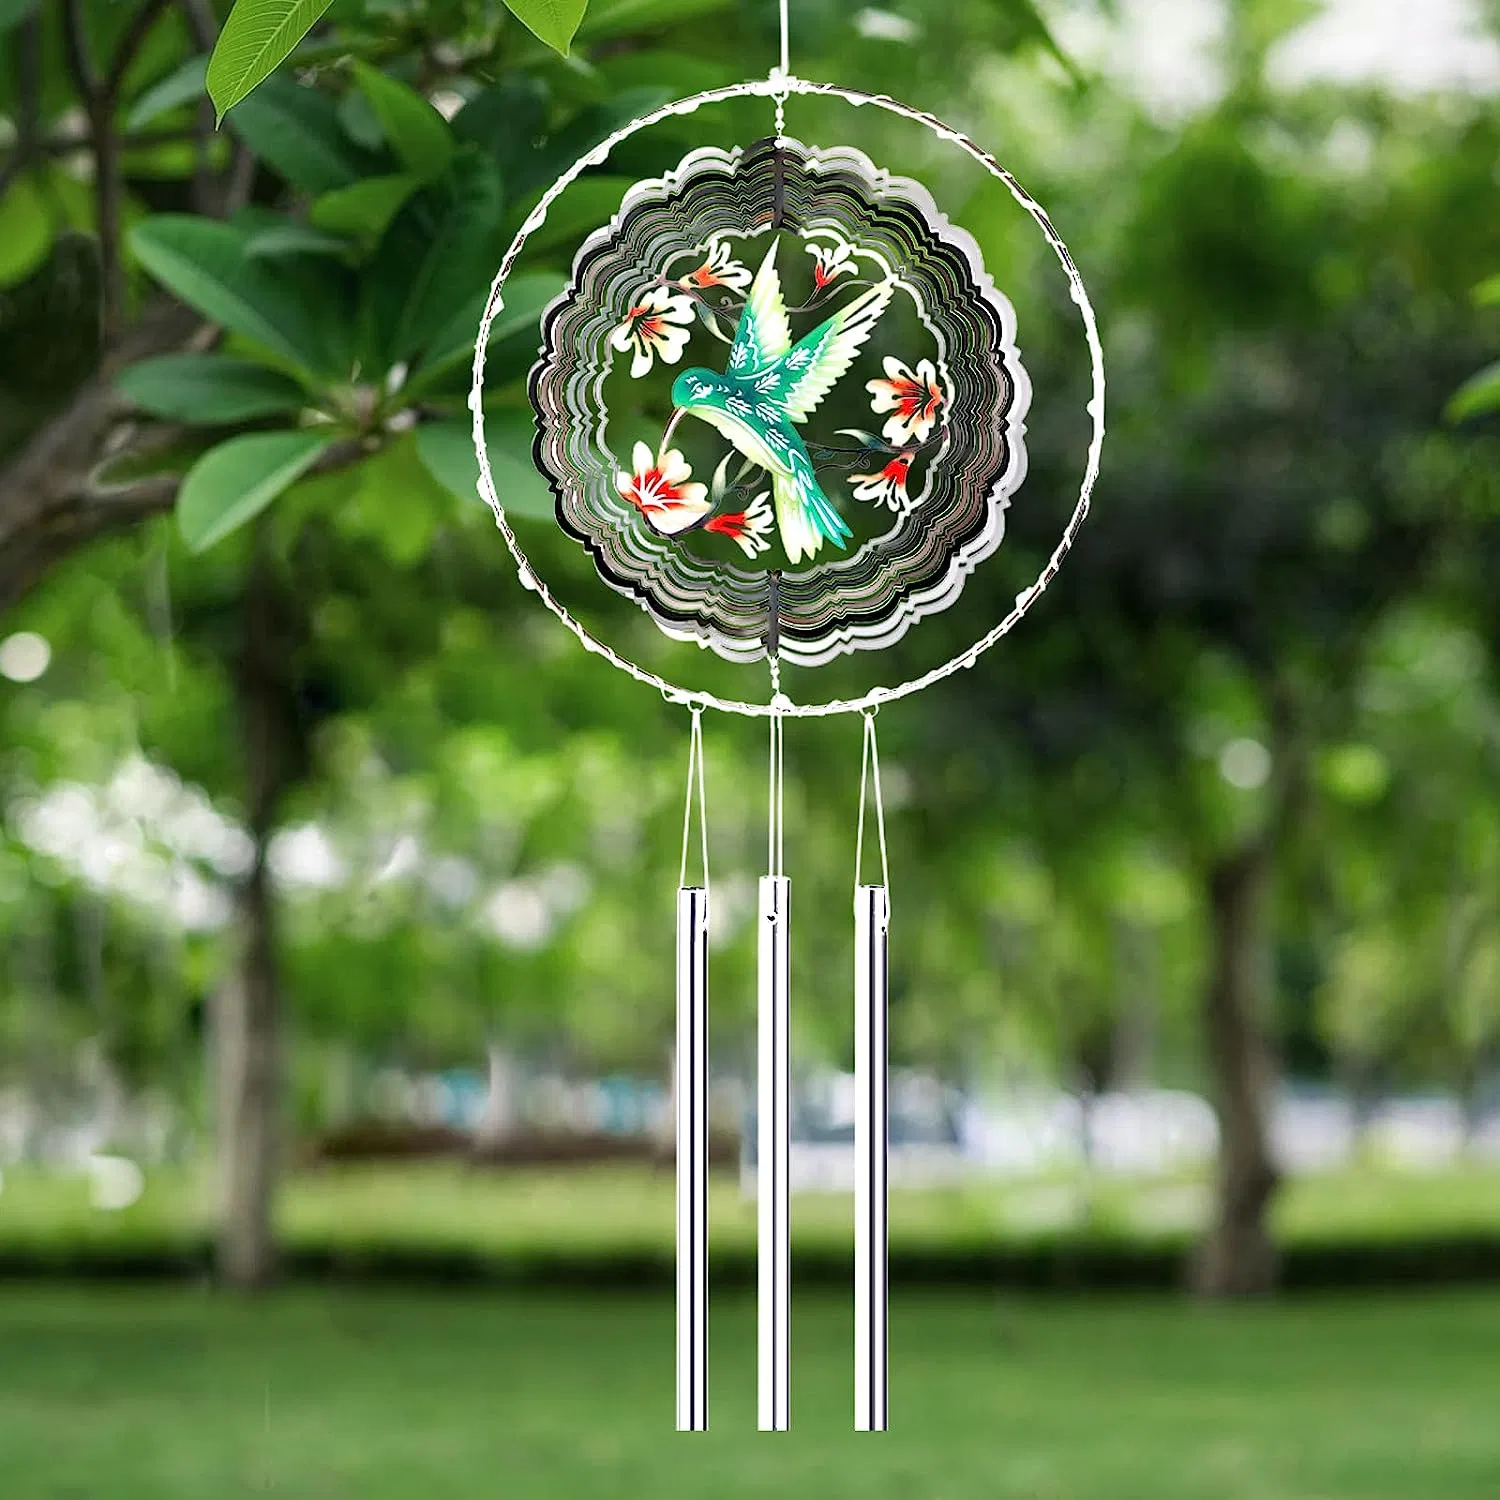 Solar Wind Chimes Outdoor Wind Chimes with Lights Waterproof Solar Powered Hanging Decorative Lights for Garden Patio Party Yard Decoration